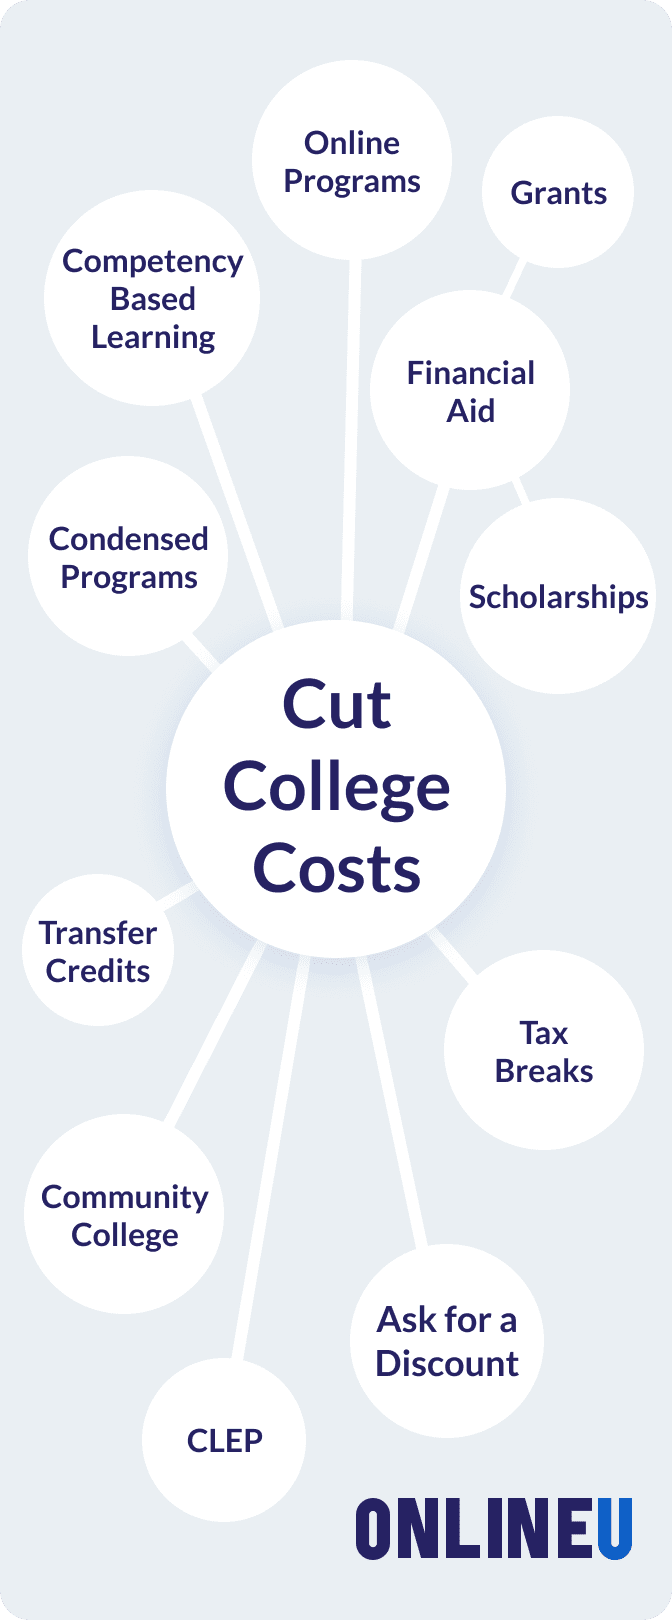 How Much Do Online Colleges Cost?